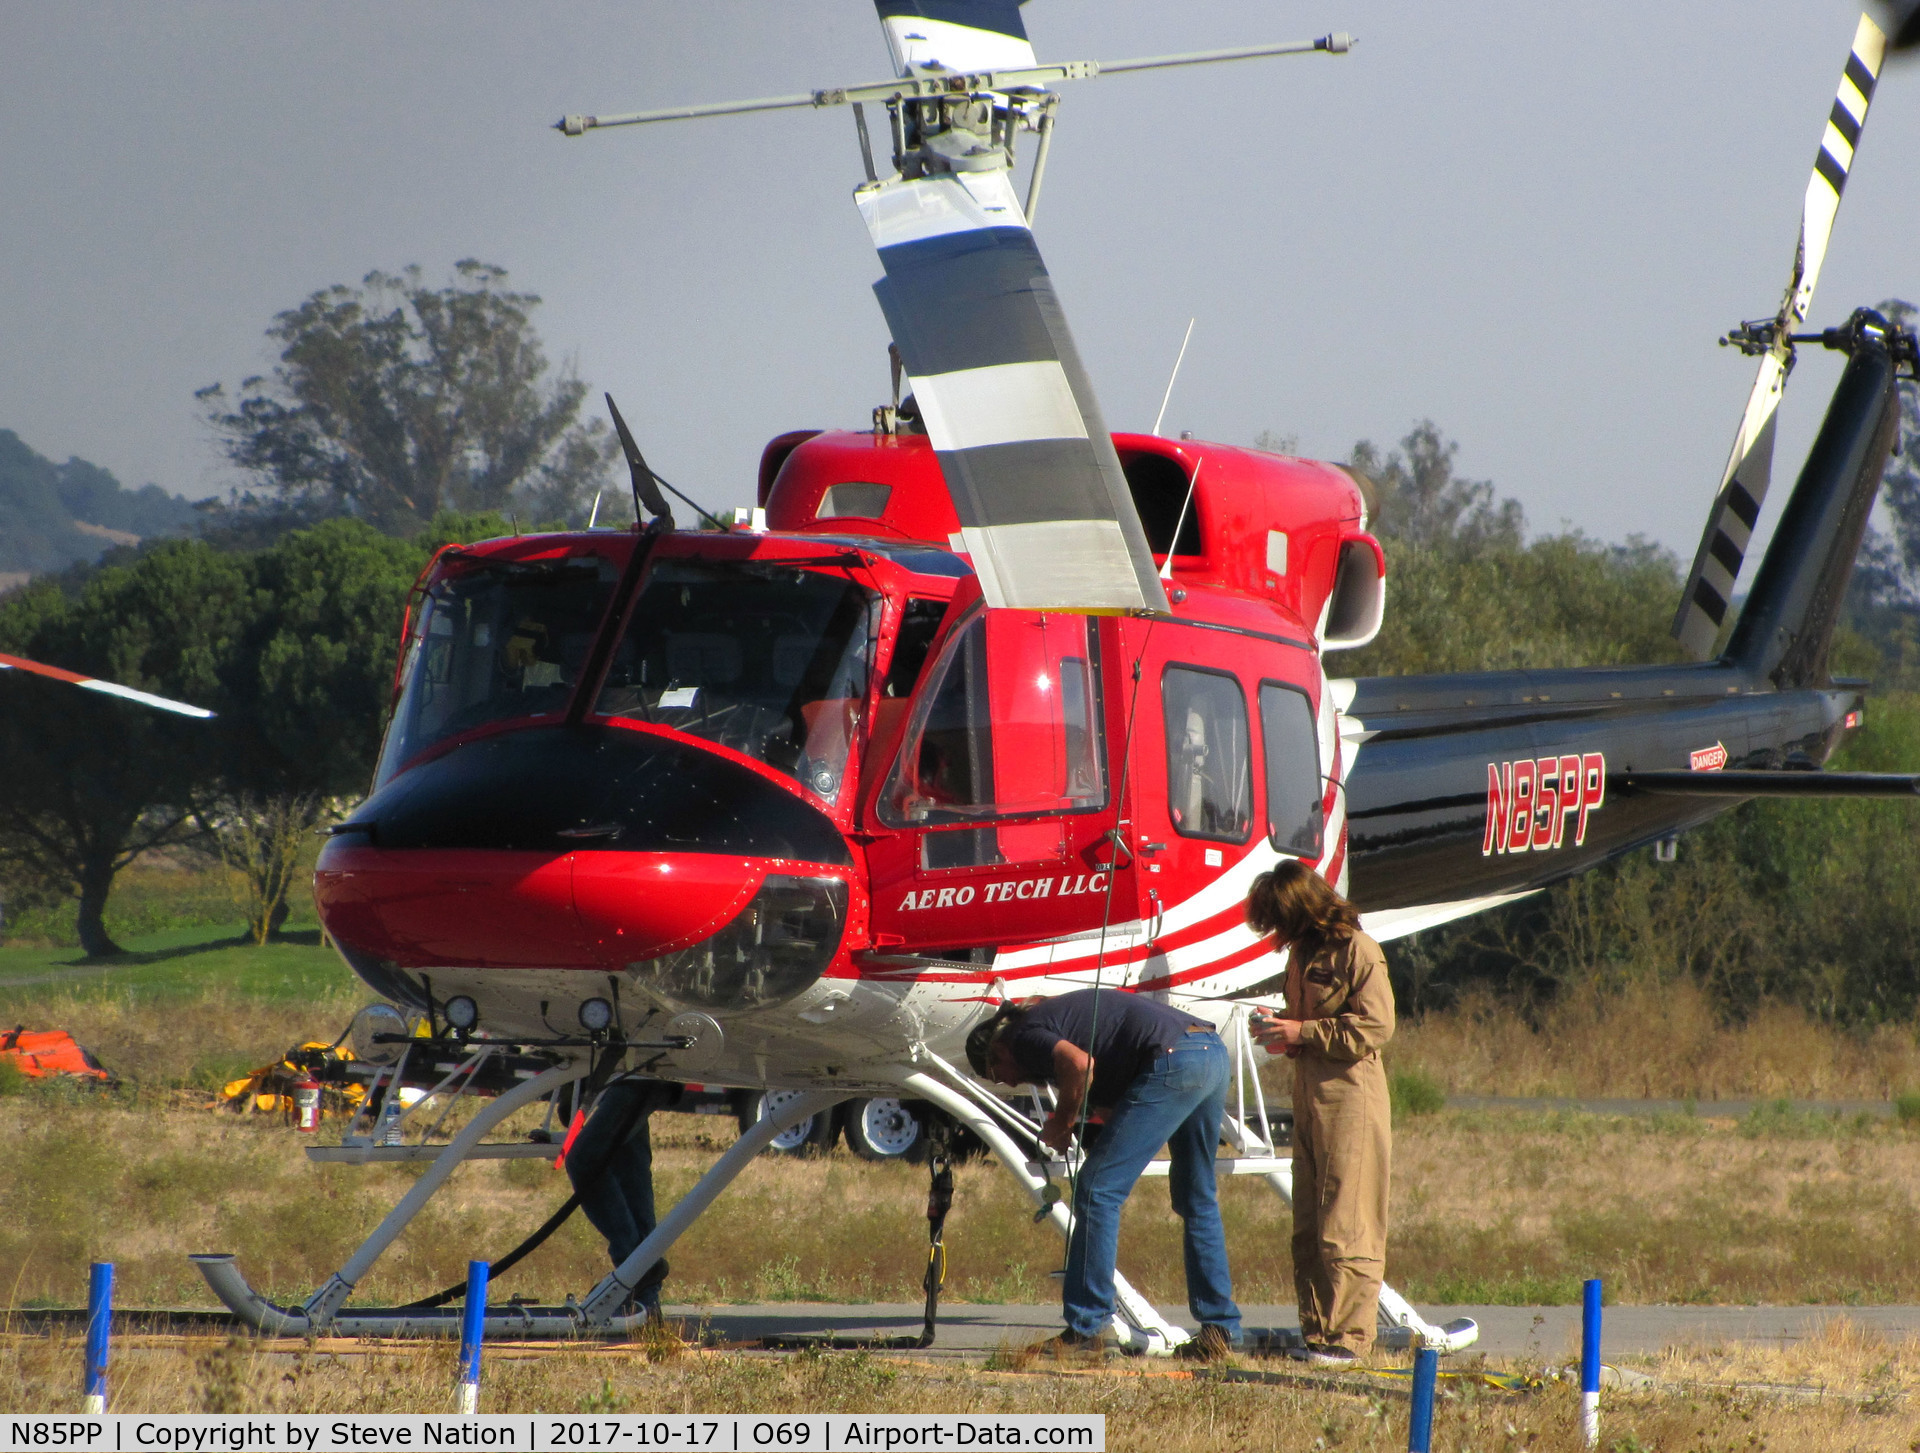 N85PP, 1985 Bell 212 C/N 31266, Pilot with Aero Tech LLC (Clovis, NM) 1985 Bell 212 after returning from water drops on the devastating October 2017 Northern California wildfires @ Petaluma Muni Airport, CA